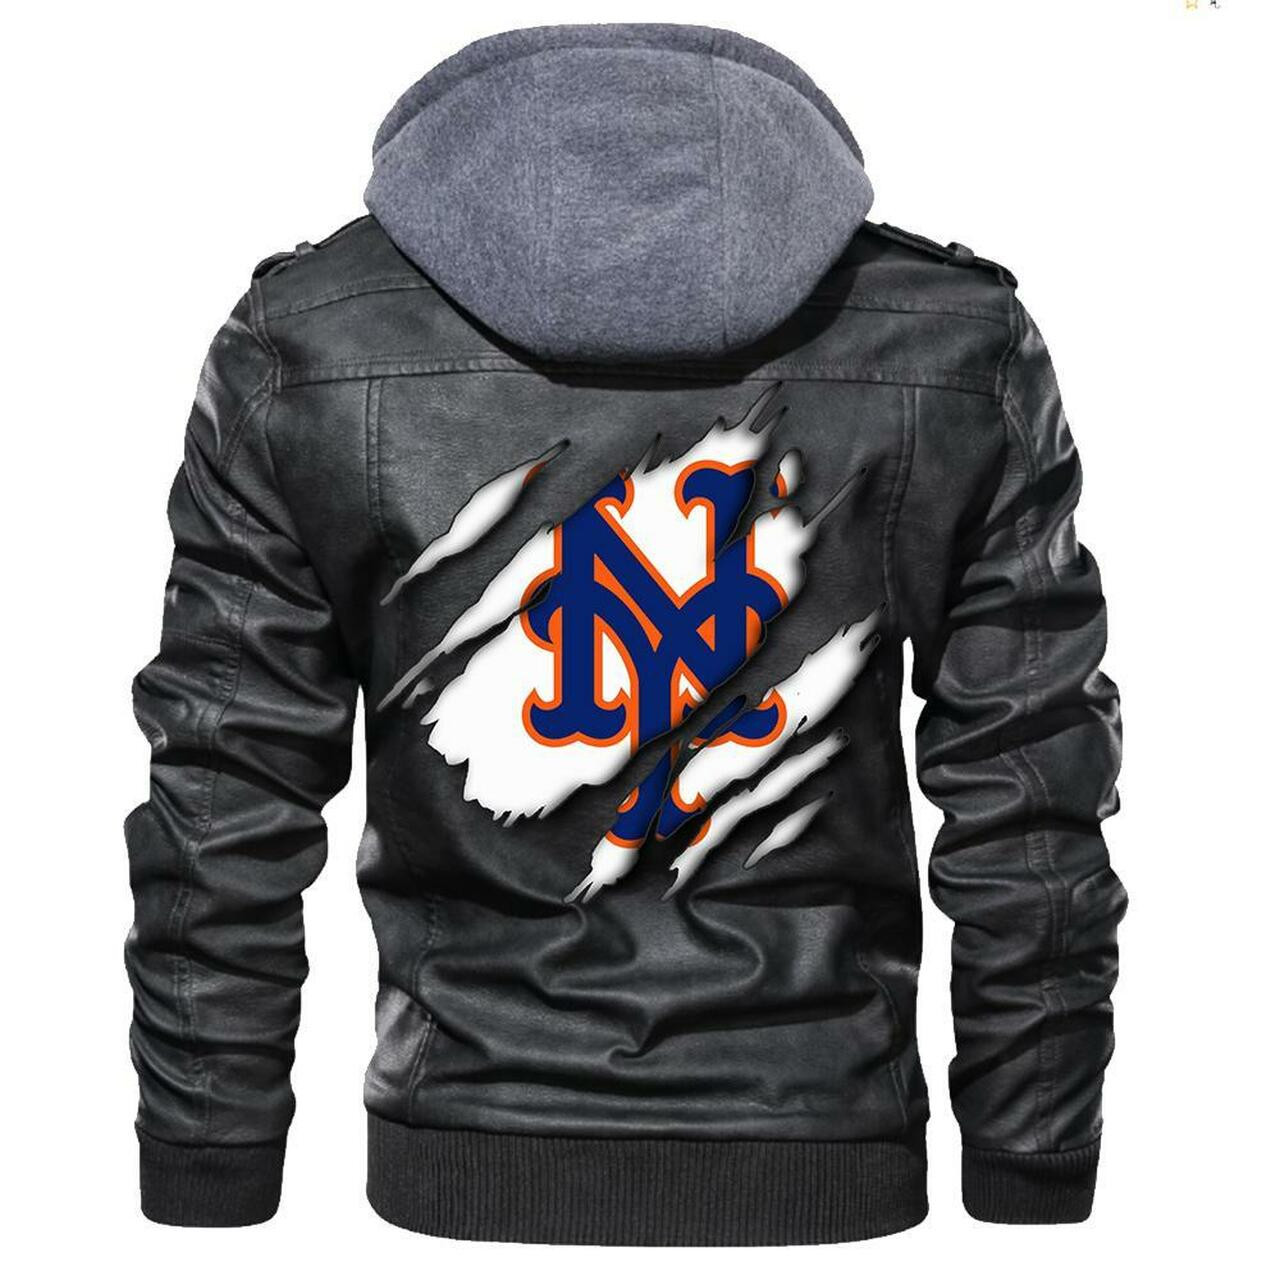 Our store has all of the latest leather jacket 154